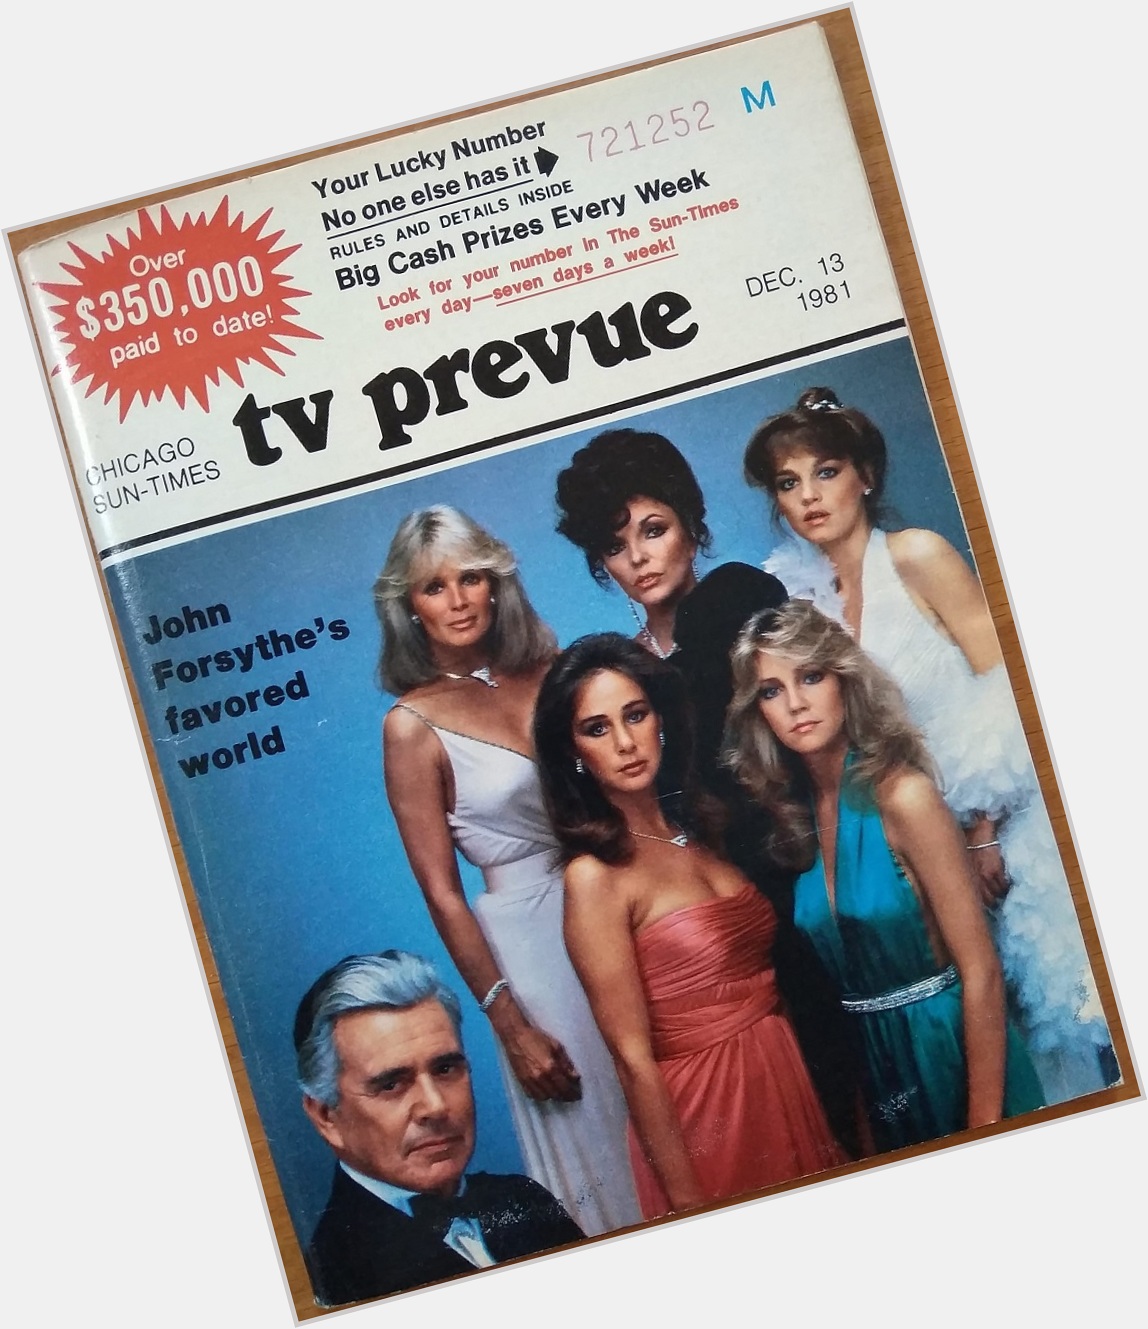 Happy Birthday to Joan Collins, born on this day in 1933
Chicago Sun-Times TV Prevue.  December 13-19, 1981 